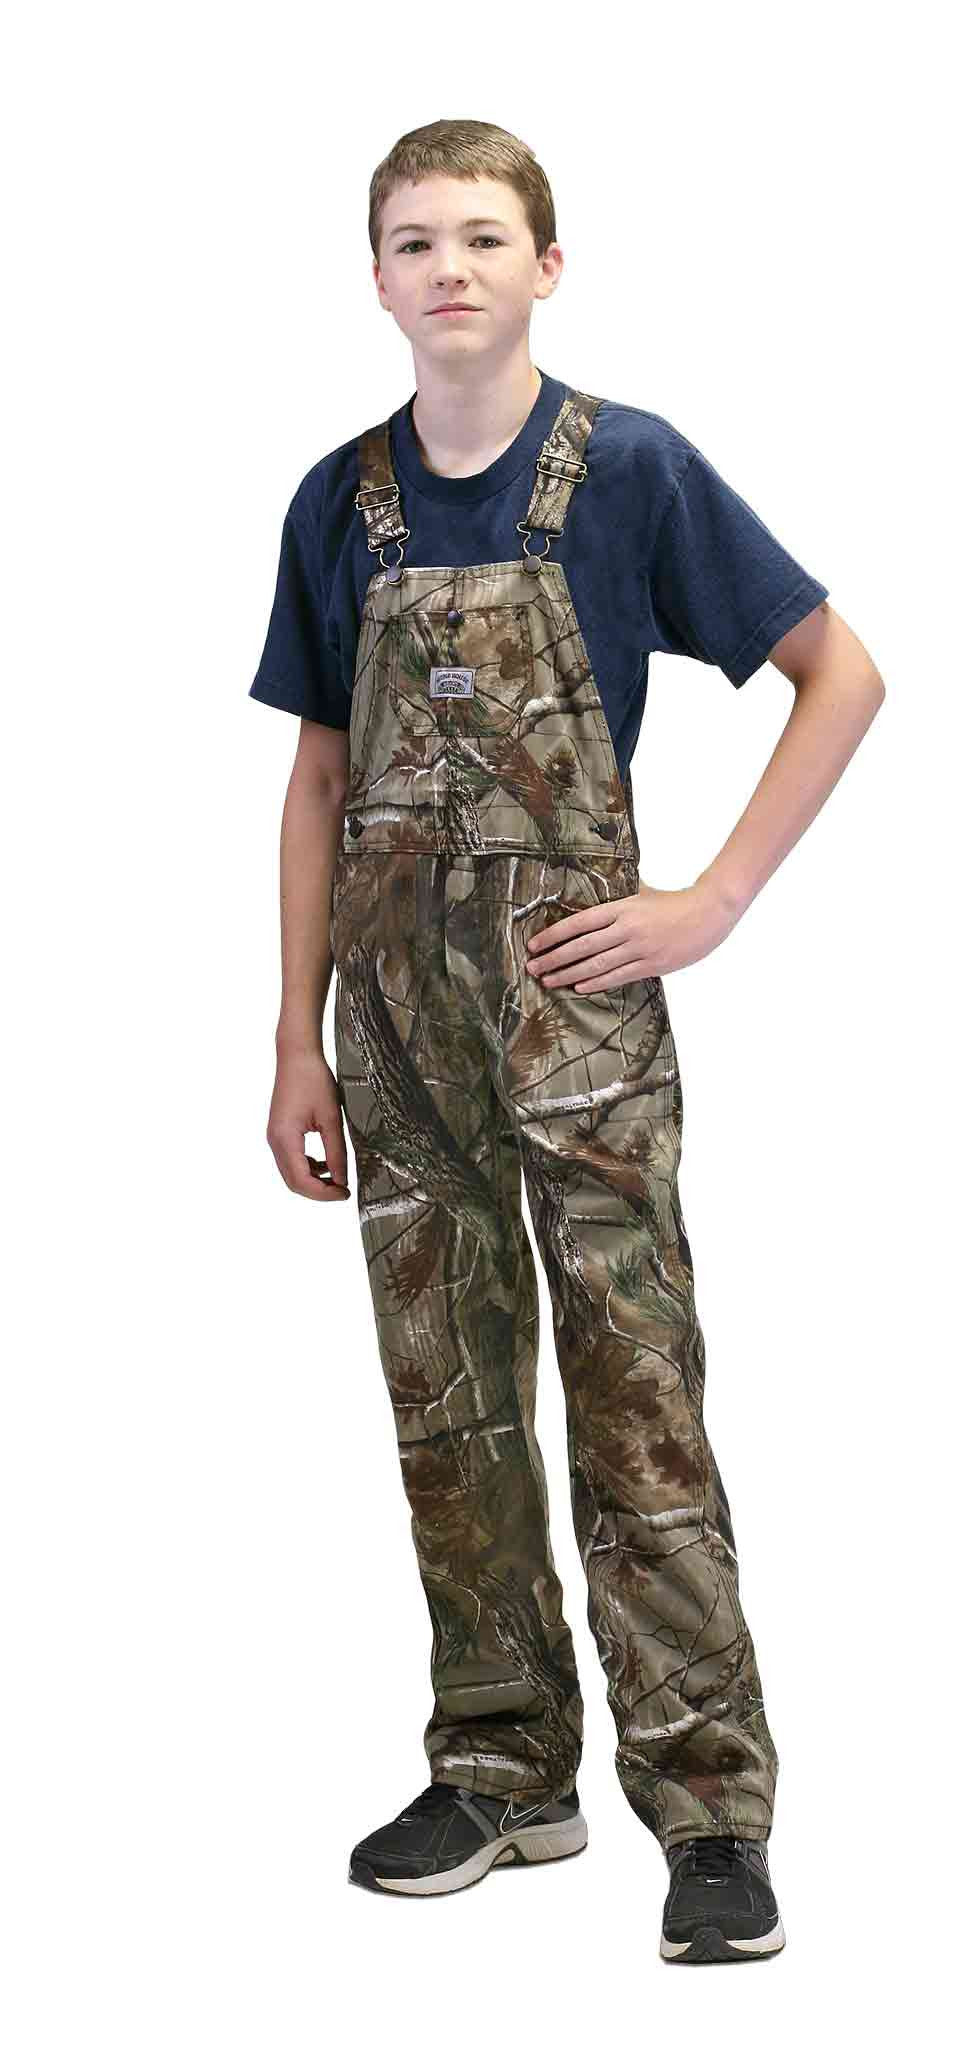 2202 Round House Made in USA Brown Duck Double Front Carpenter Dungaree  Jean – Round House American Made Jeans Made in USA Overalls, Workwear